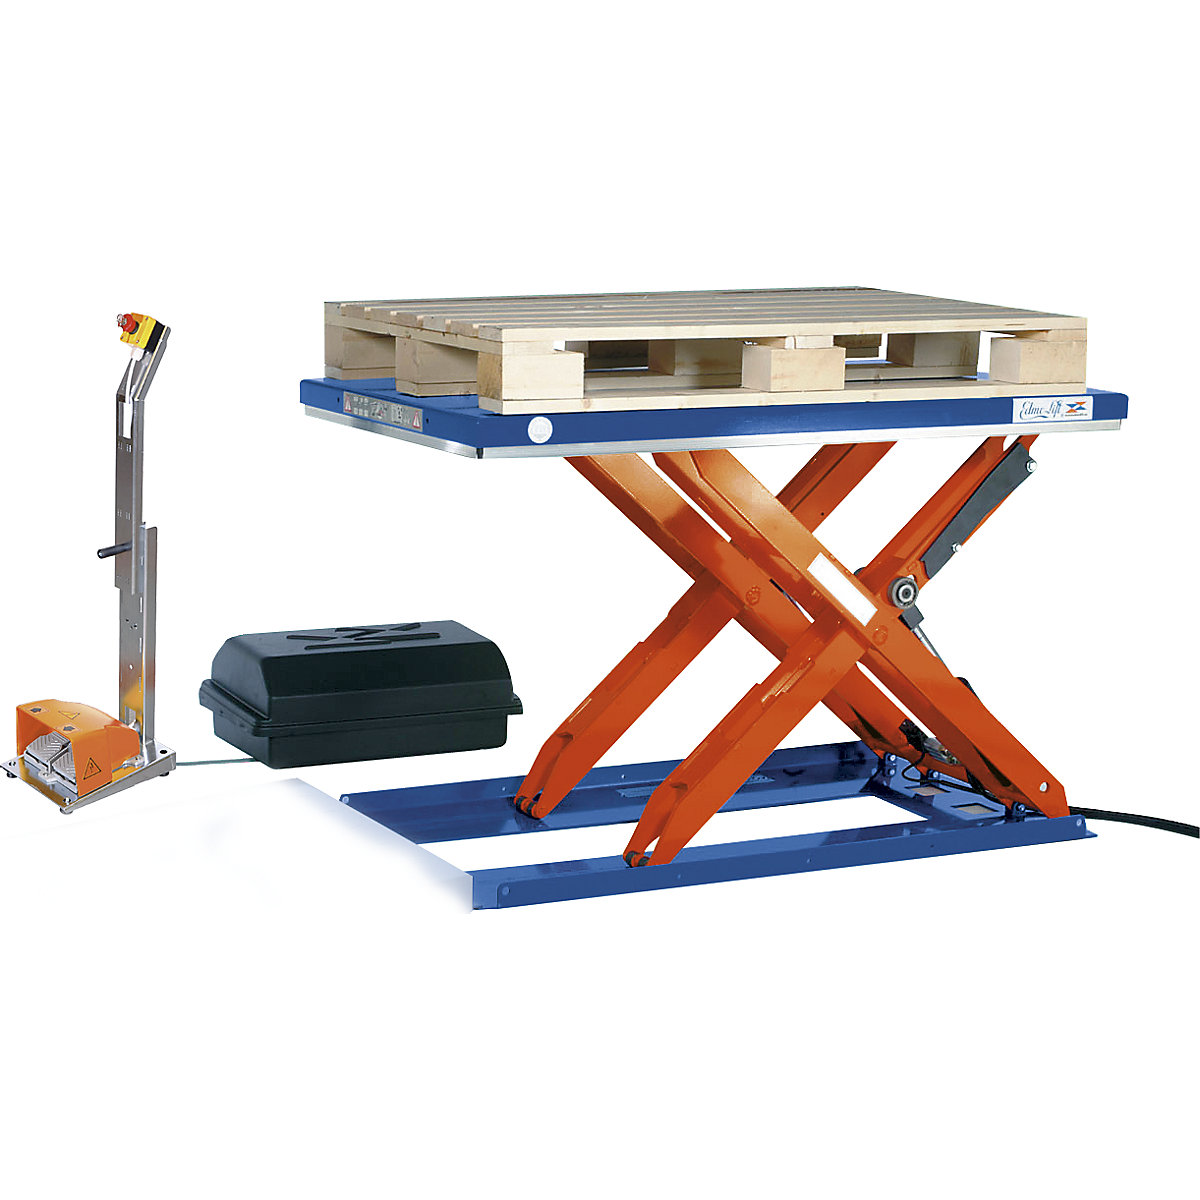 Low profile lift table – Edmolift, LxW 1500 x 800 mm, lifting range up to 800 mm, closed platform, 400 V, with foot operated control unit